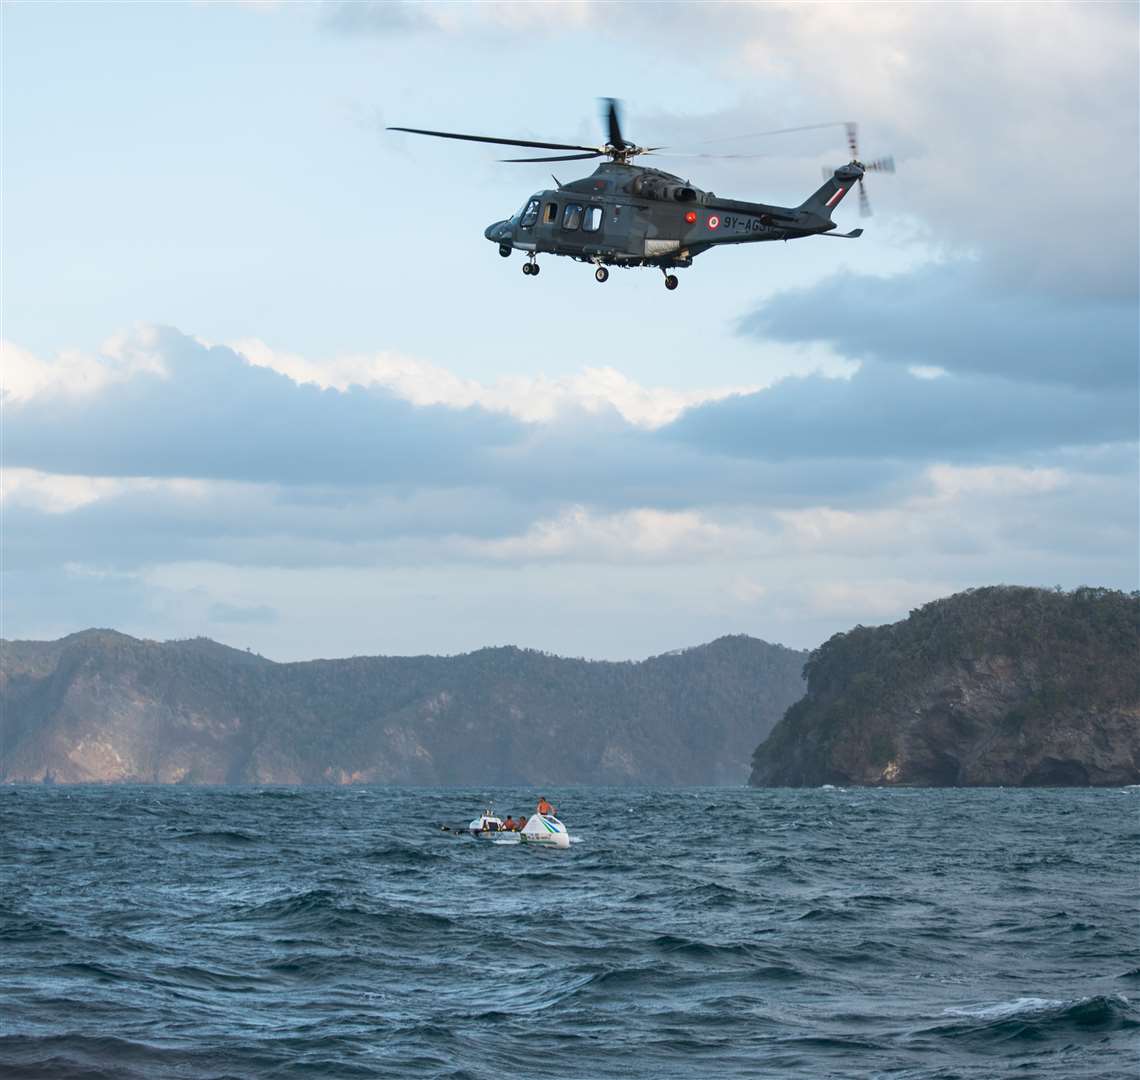 Trinidad coast guard assisting the team get to land safely